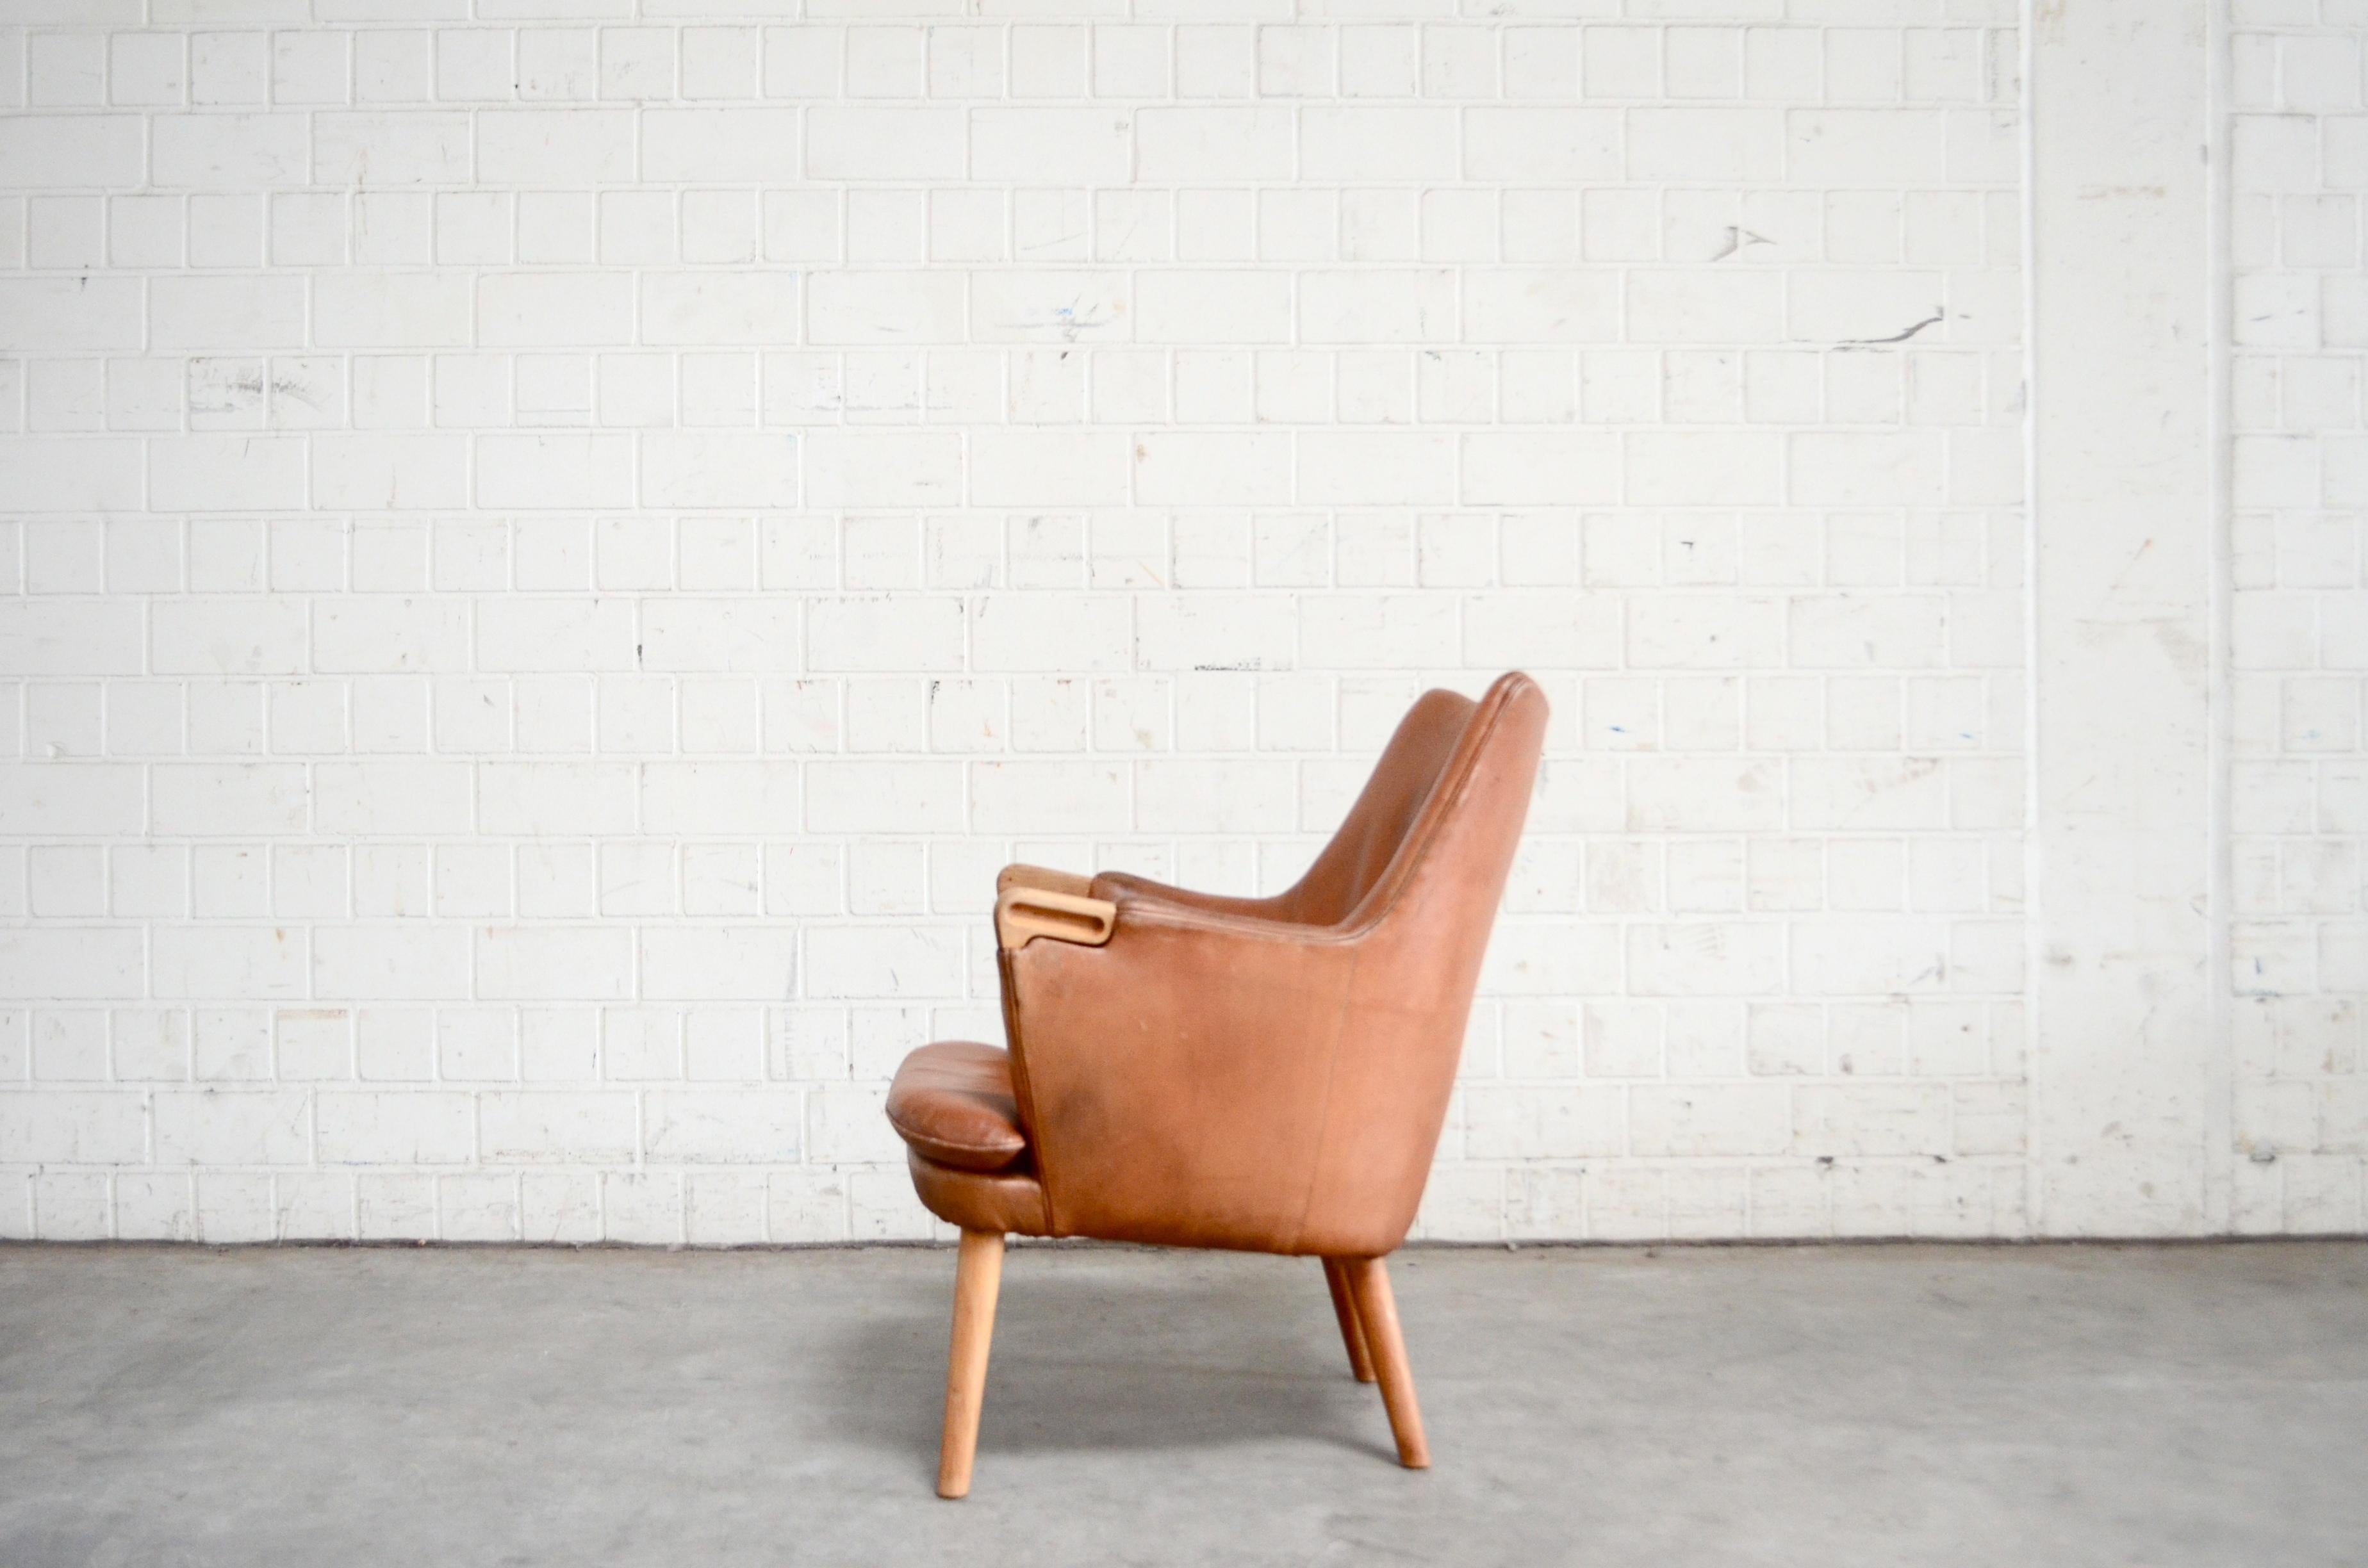 Hans Wegner designed this chair in 1952.
The model is AP 20 and was produced by AP Stolen and was called the Mini Bear Chair.
It was only produced until the late 1970s.
This chair come from the 1960s and its made with brandy cognac aniline